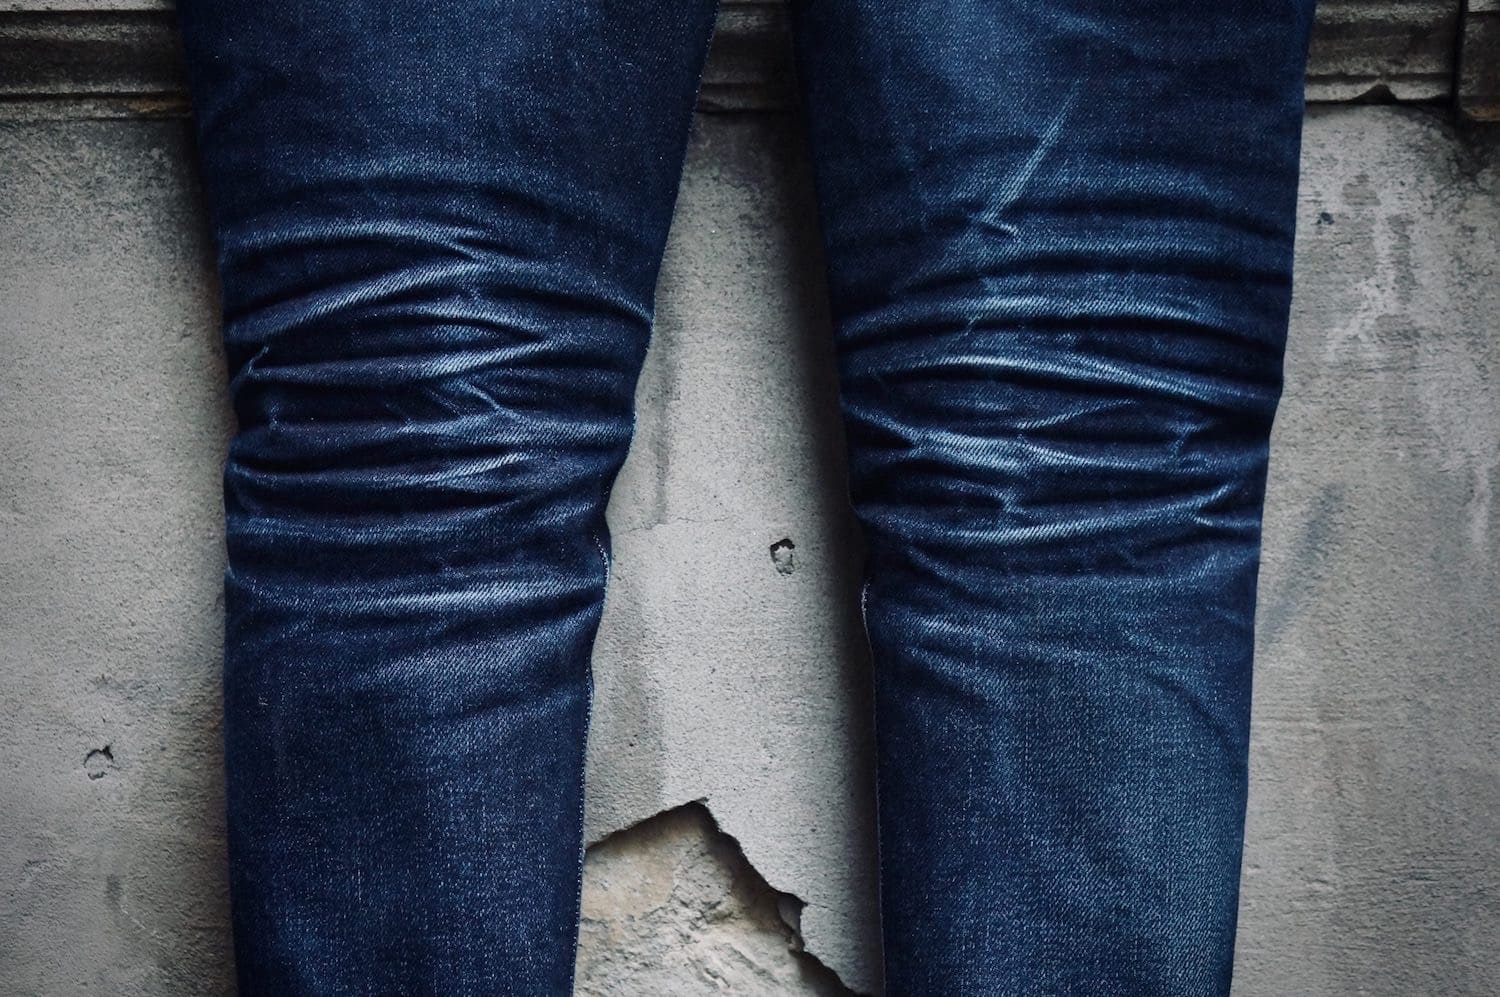 Best Foot Forward: How to Photograph Raw Denim